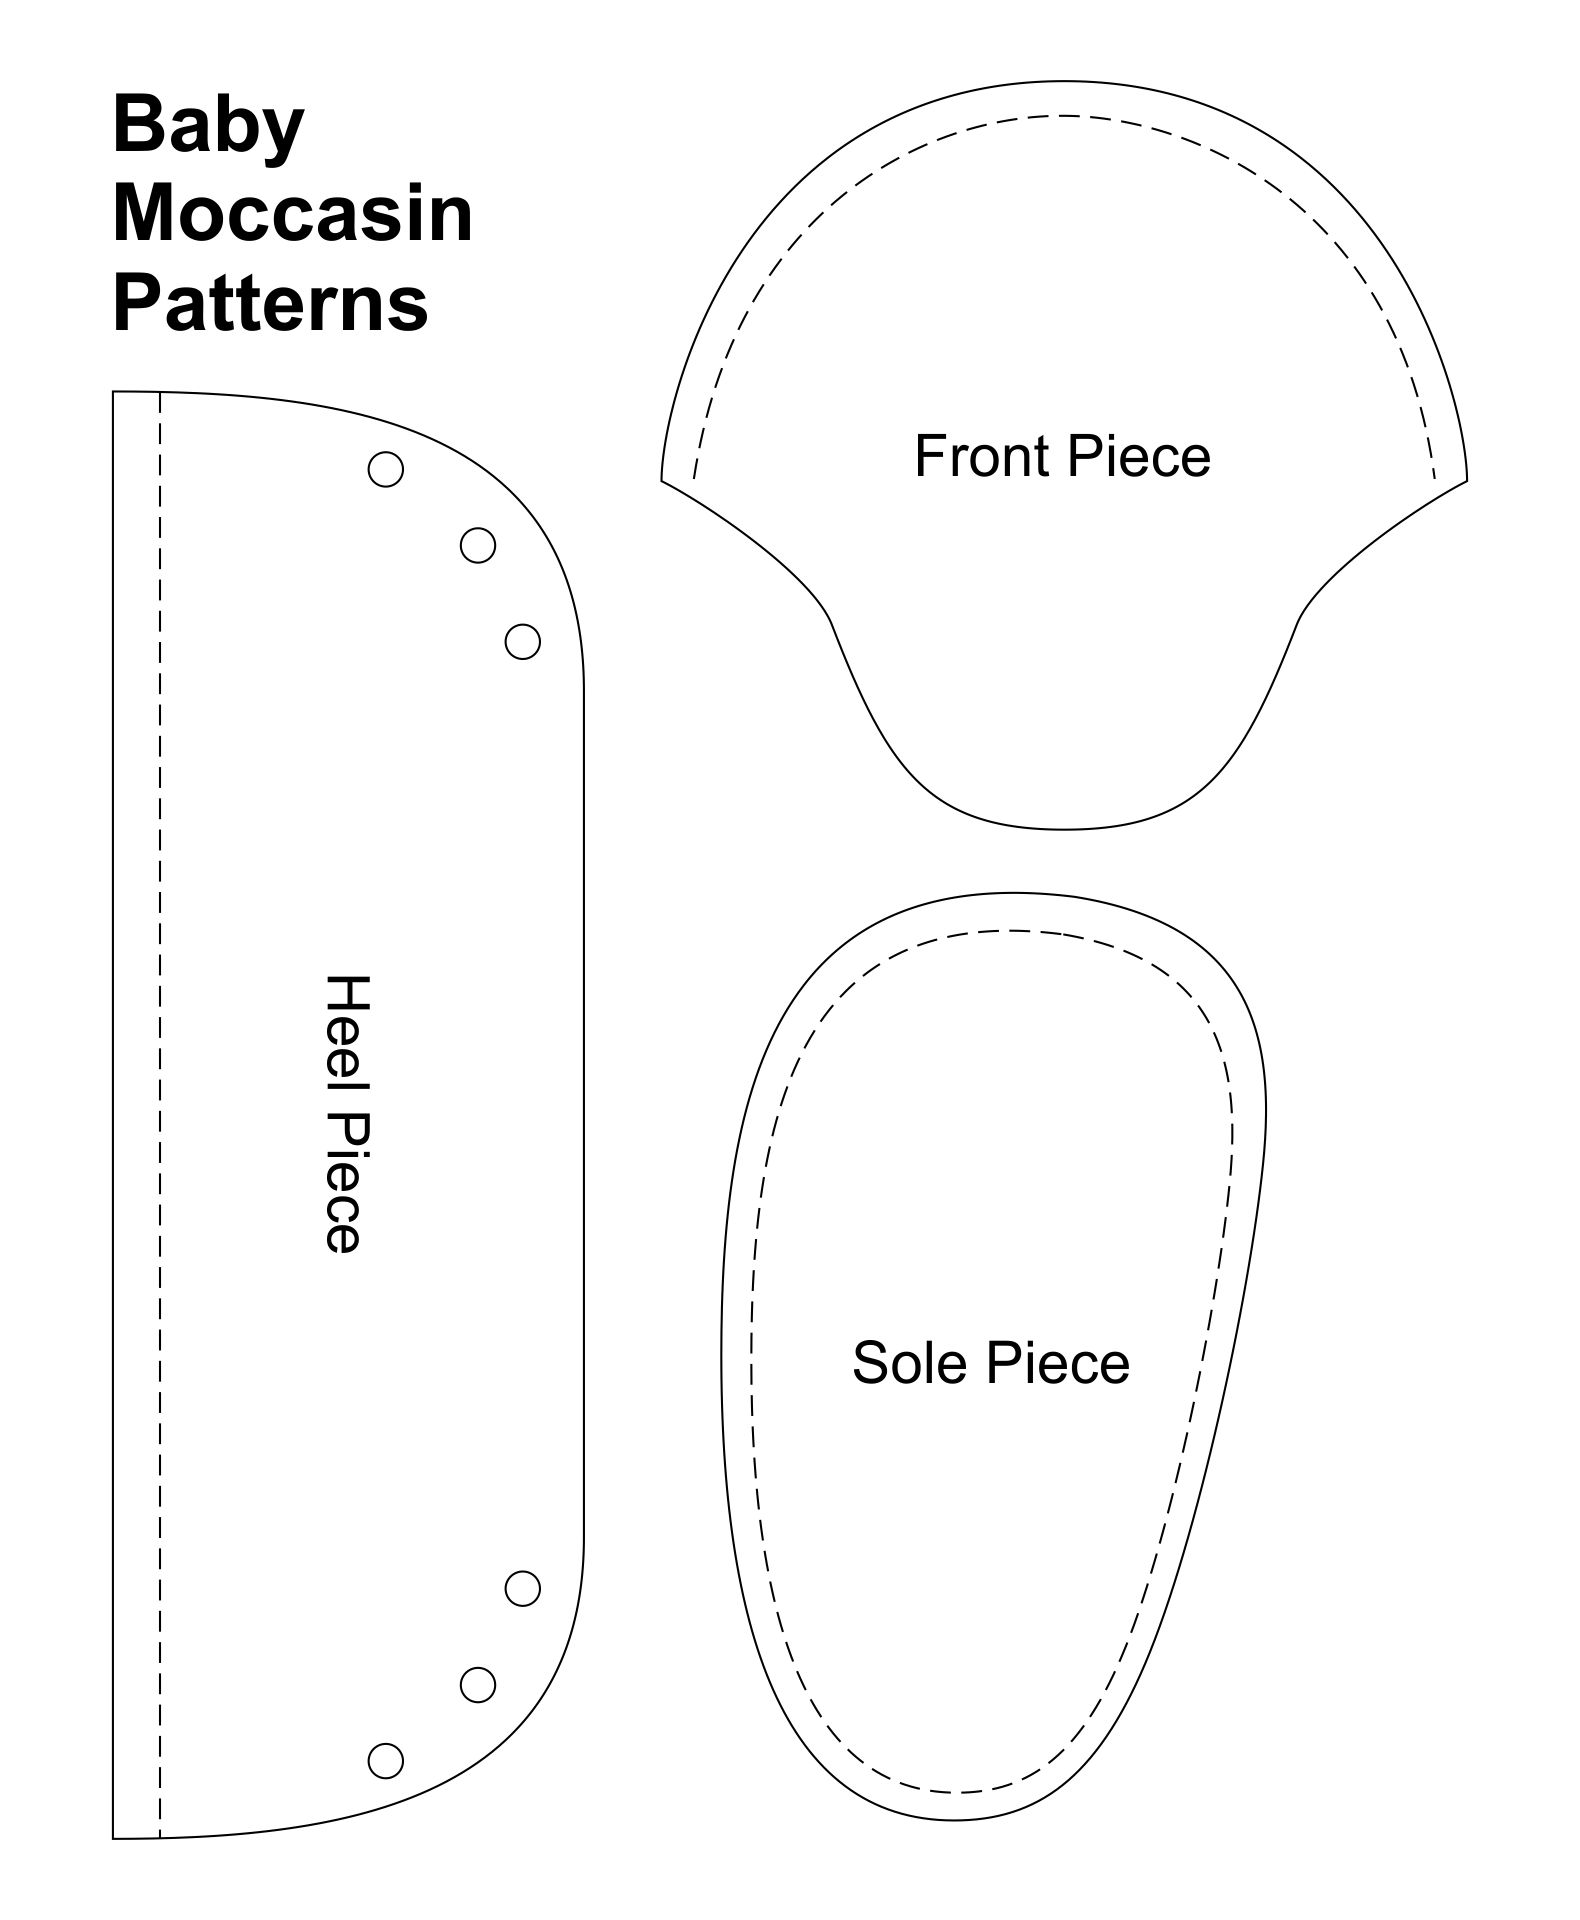 4 Best Images of Baby Moccasin Pattern Printable Free Baby Moccasin 